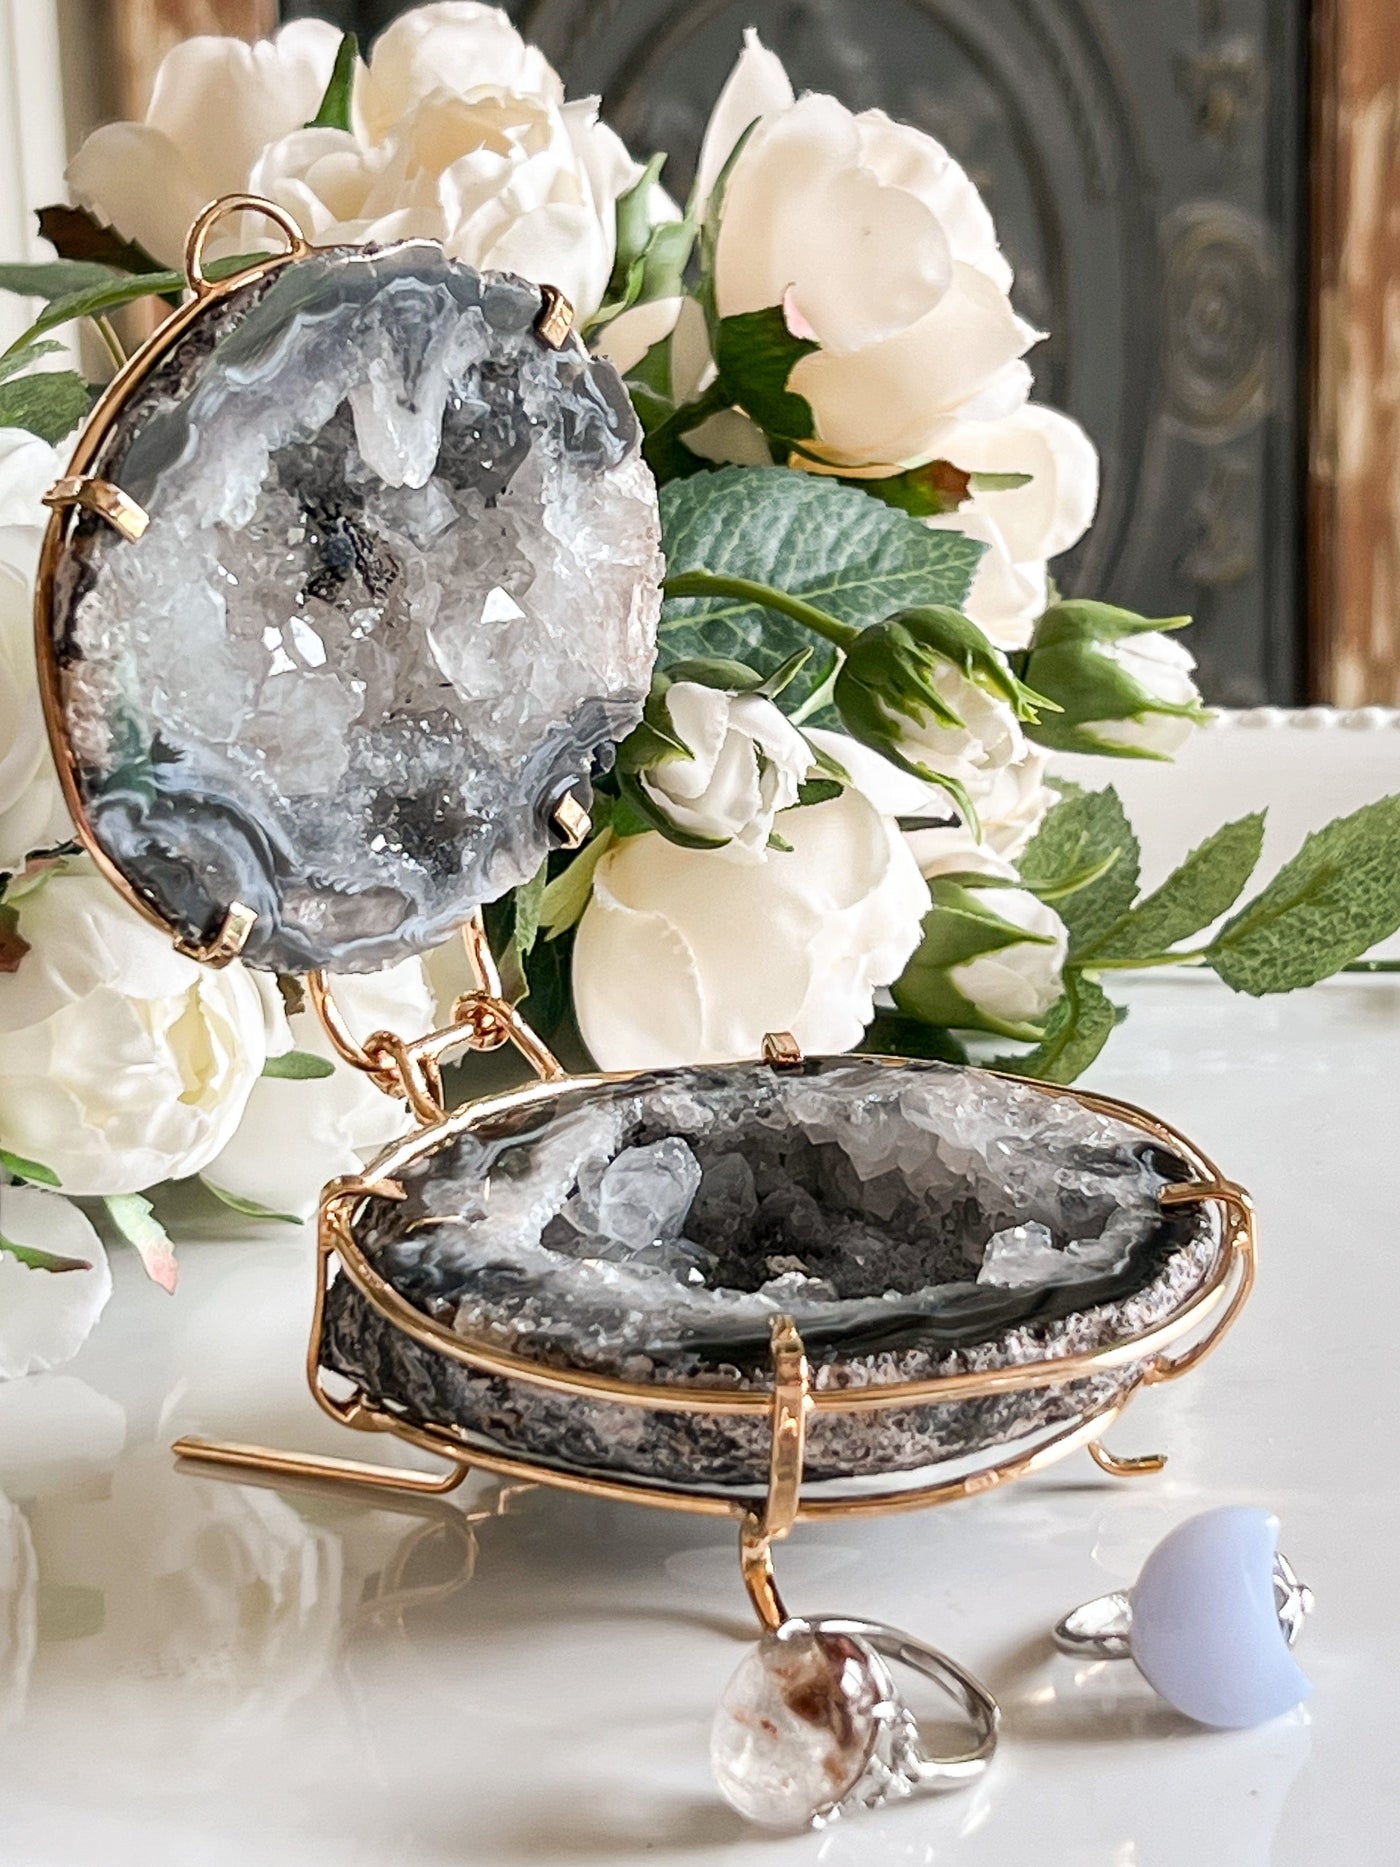 GEODE JEWELRY BOX Revive In Style Vintage Furniture Painted Refinished Redesign Beautiful One of a Kind Artistic Antique Unique Home Decor Interior Design French Country Shabby Chic Cottage Farmhouse Grandmillenial Coastal Chalk Paint Metallic Glam Eclectic Quality Dovetailed Rustic Furniture Painter Pinterest Bedroom Living Room Entryway Kitchen Home Trends House Styles Decorating ideas